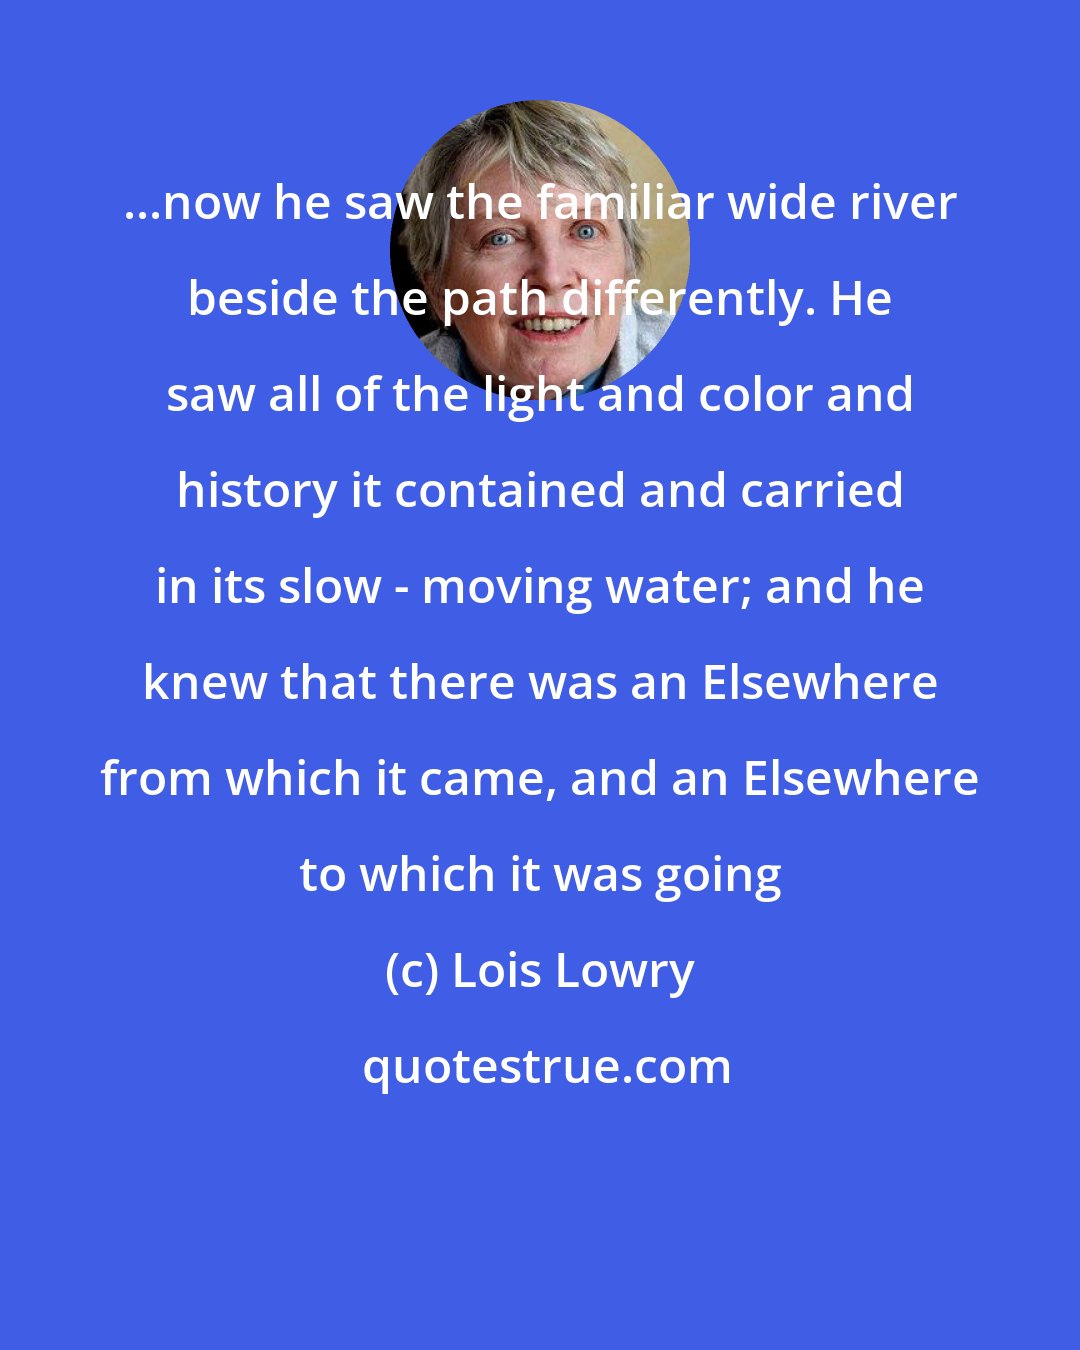 Lois Lowry: ...now he saw the familiar wide river beside the path differently. He saw all of the light and color and history it contained and carried in its slow - moving water; and he knew that there was an Elsewhere from which it came, and an Elsewhere to which it was going